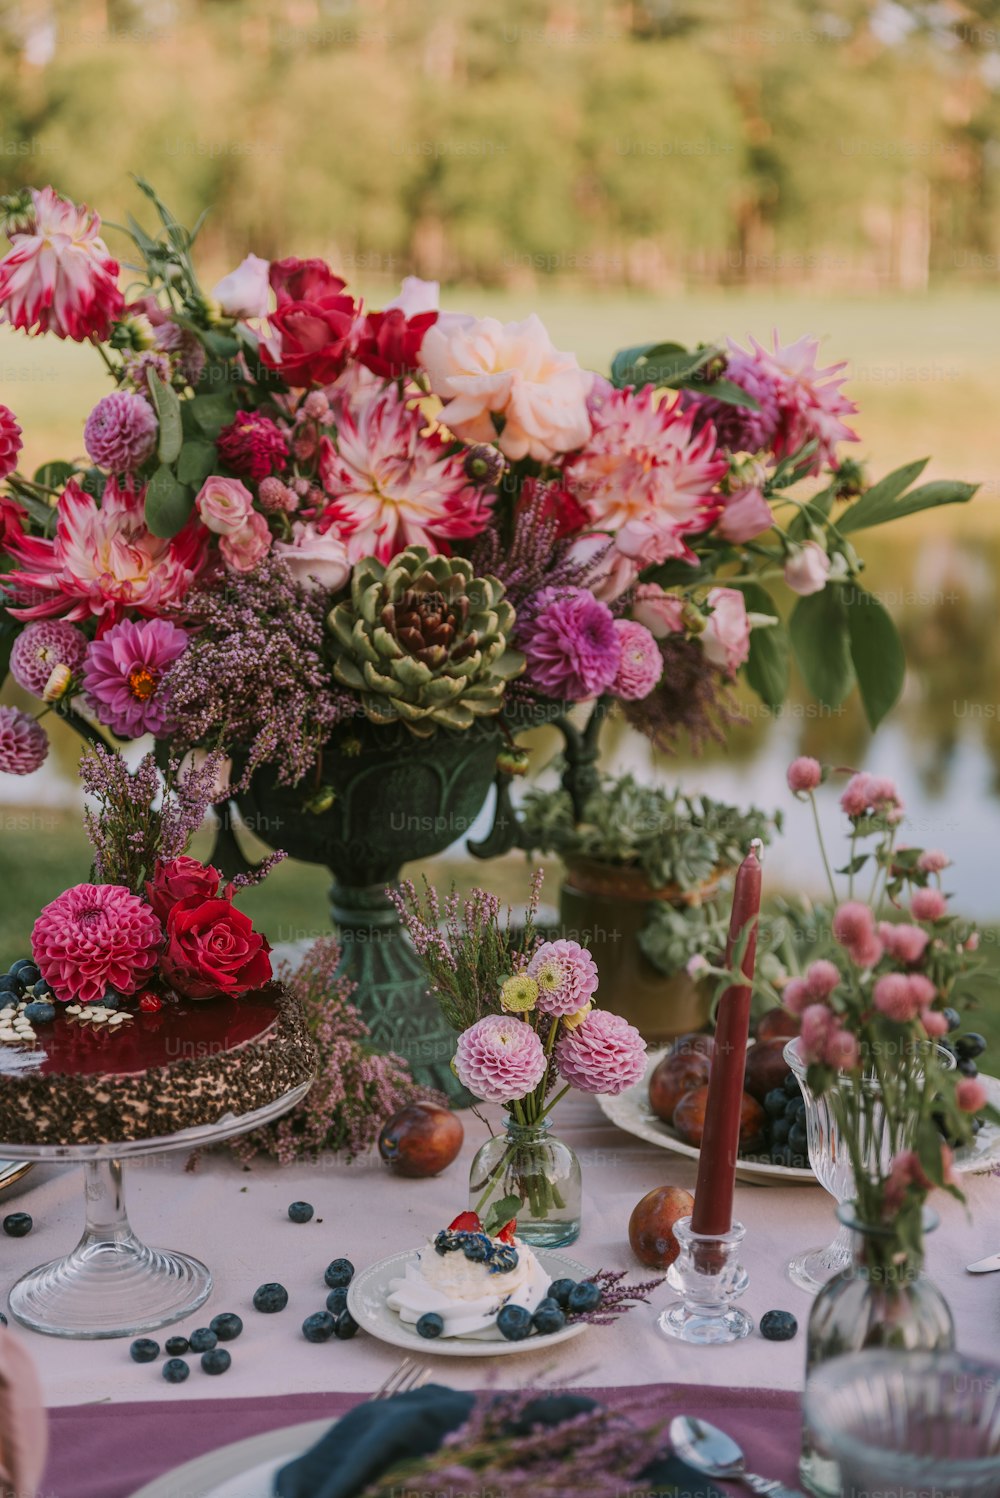 a table topped with plates and vases filled with flowers